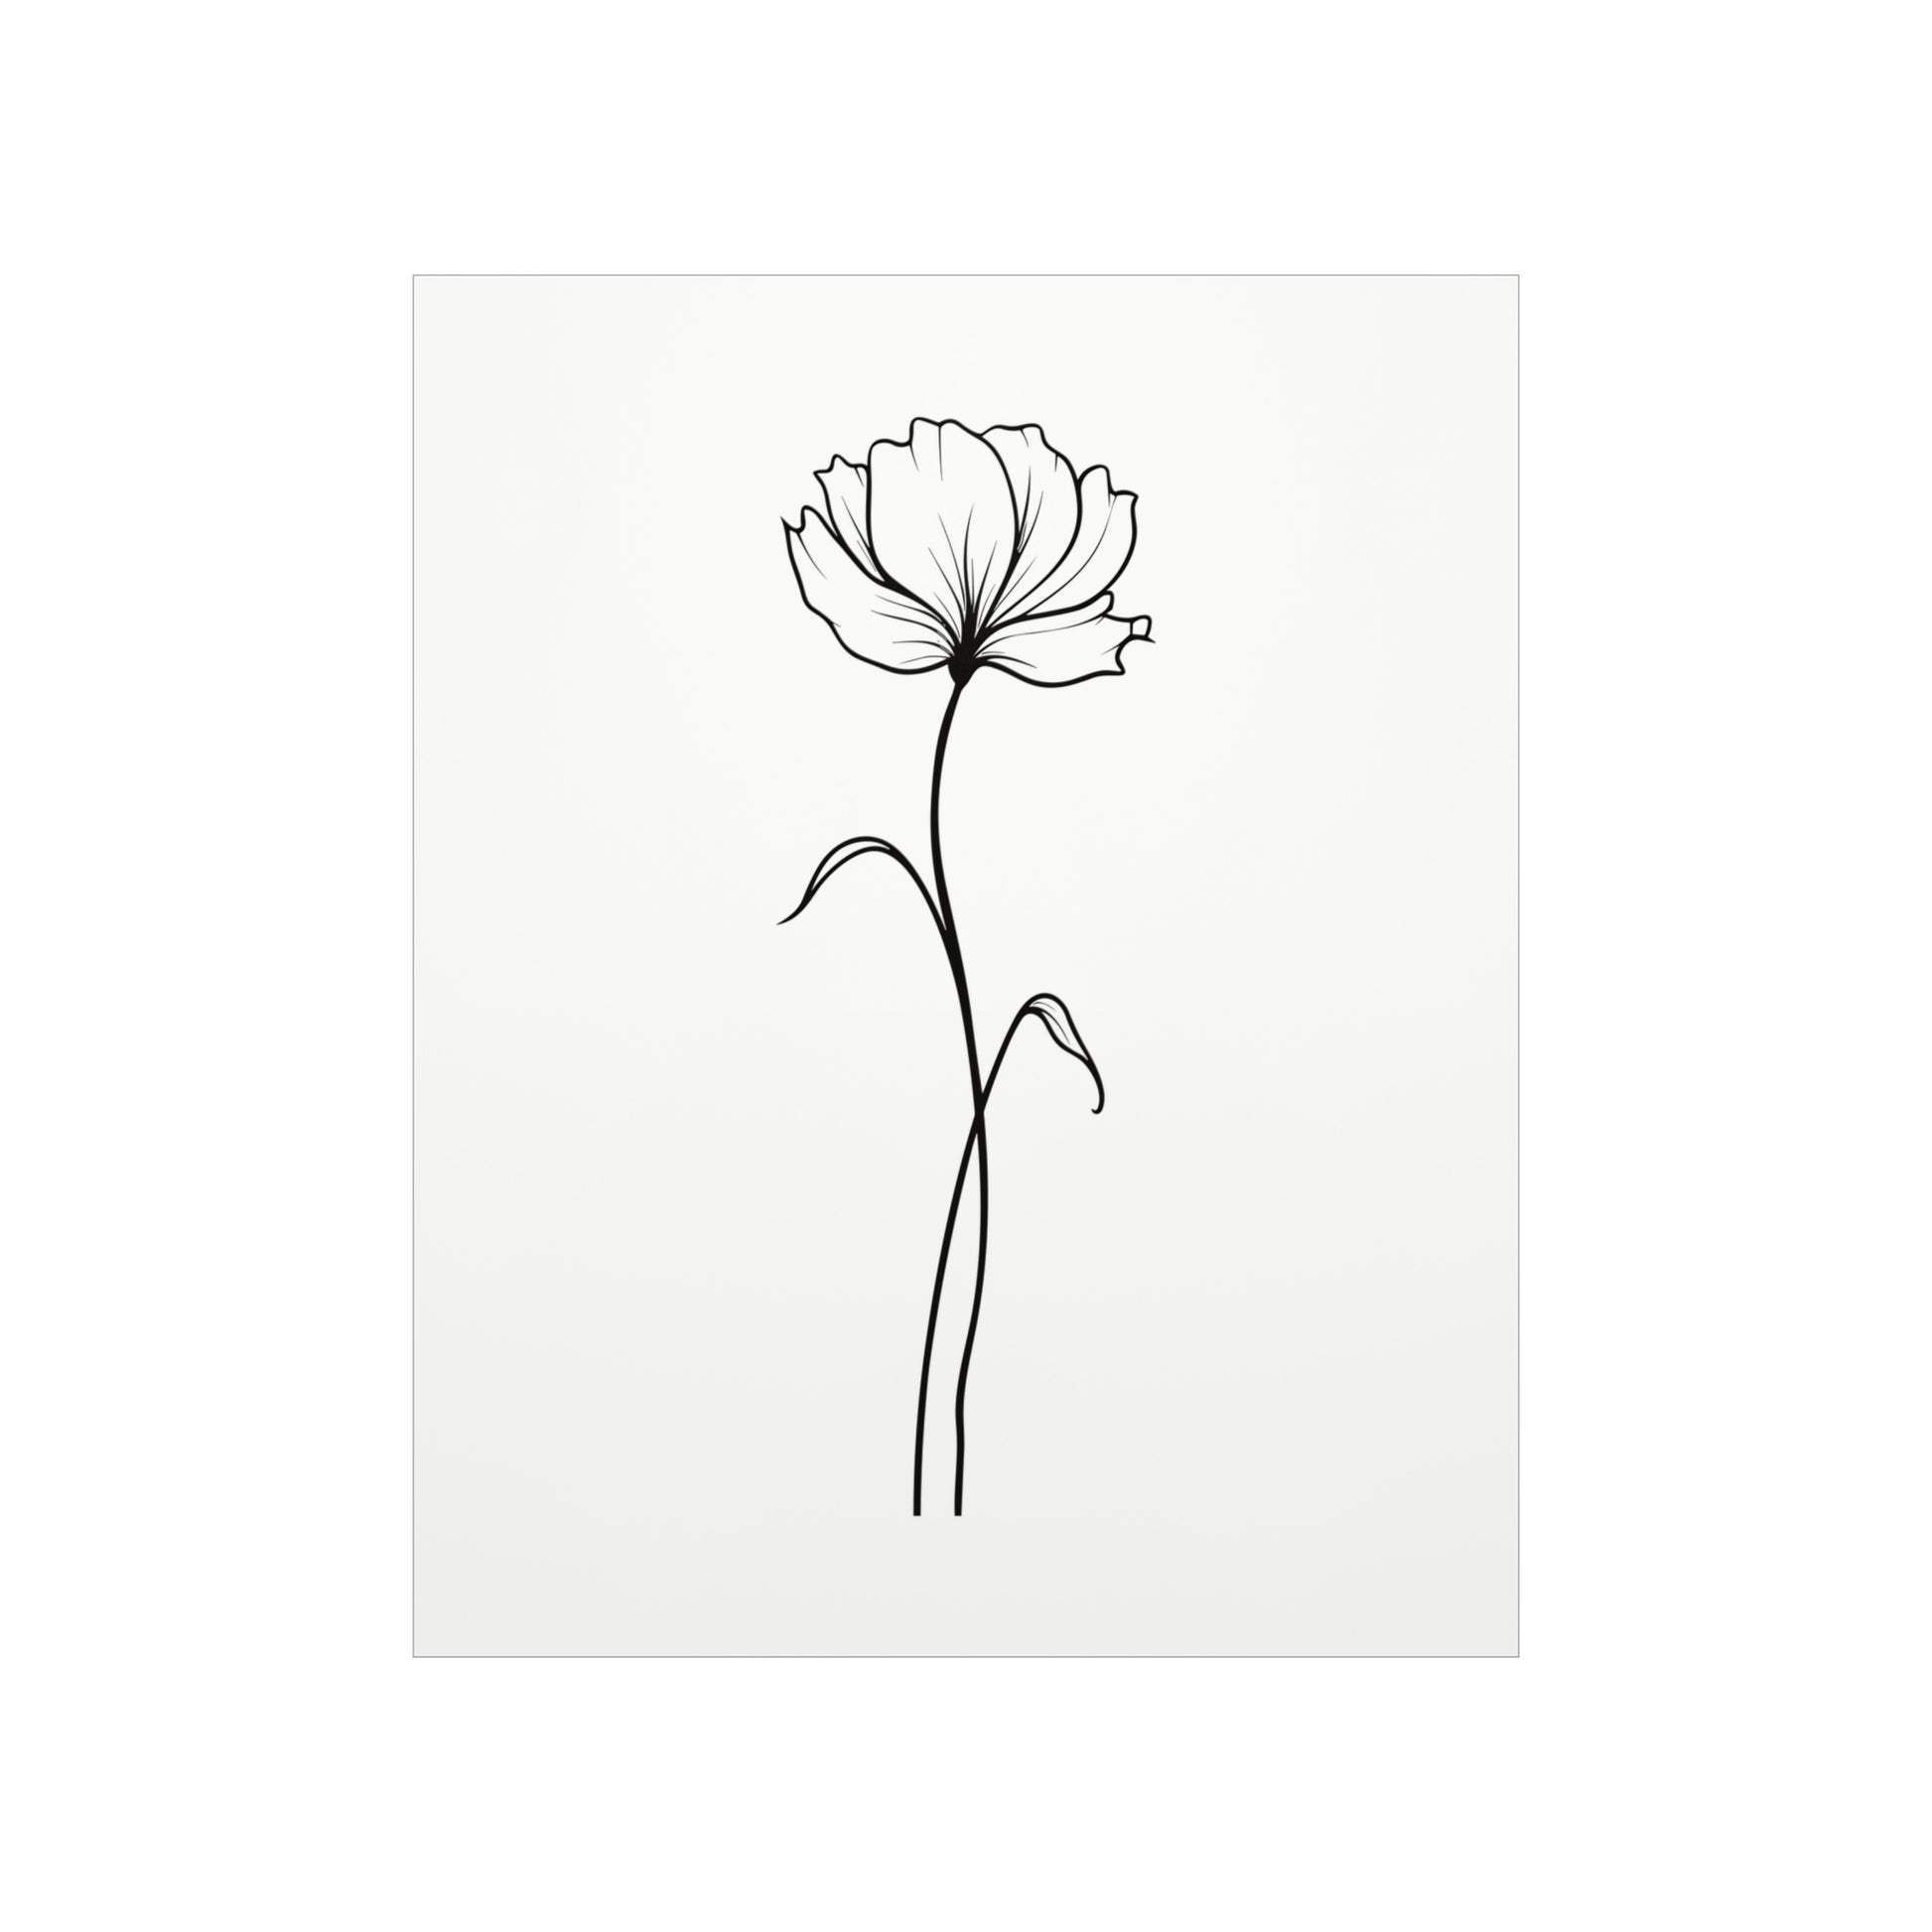 Flower Line Drawing Poster, Minimalist Black White Retro Vintage Print Picture Wall Art Vertical Artwork Small Large Decor Paper Starcove Fashion